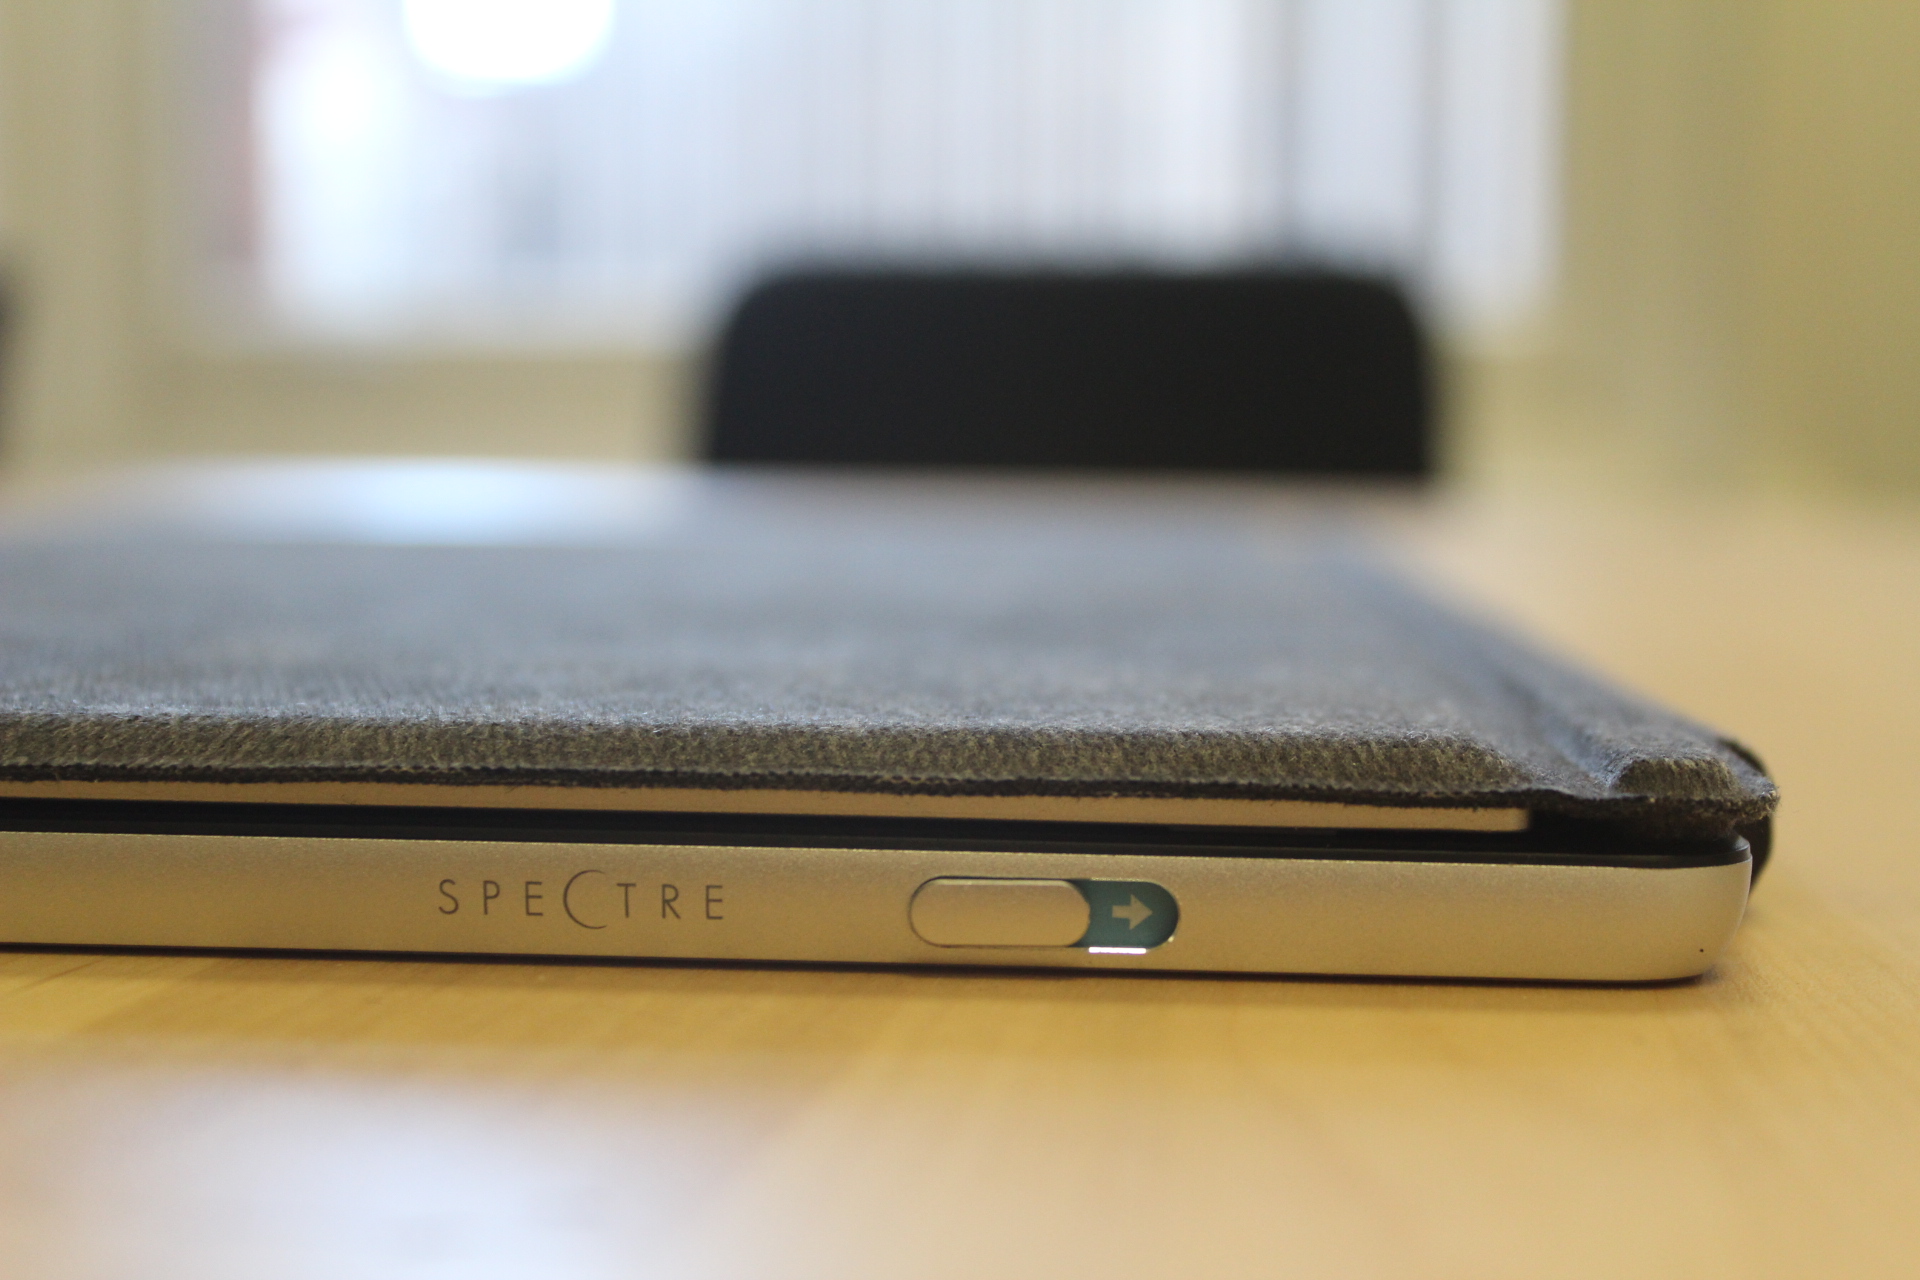 The button you need to slide in order to push out the kickstand bar on the HP Spectre x2.